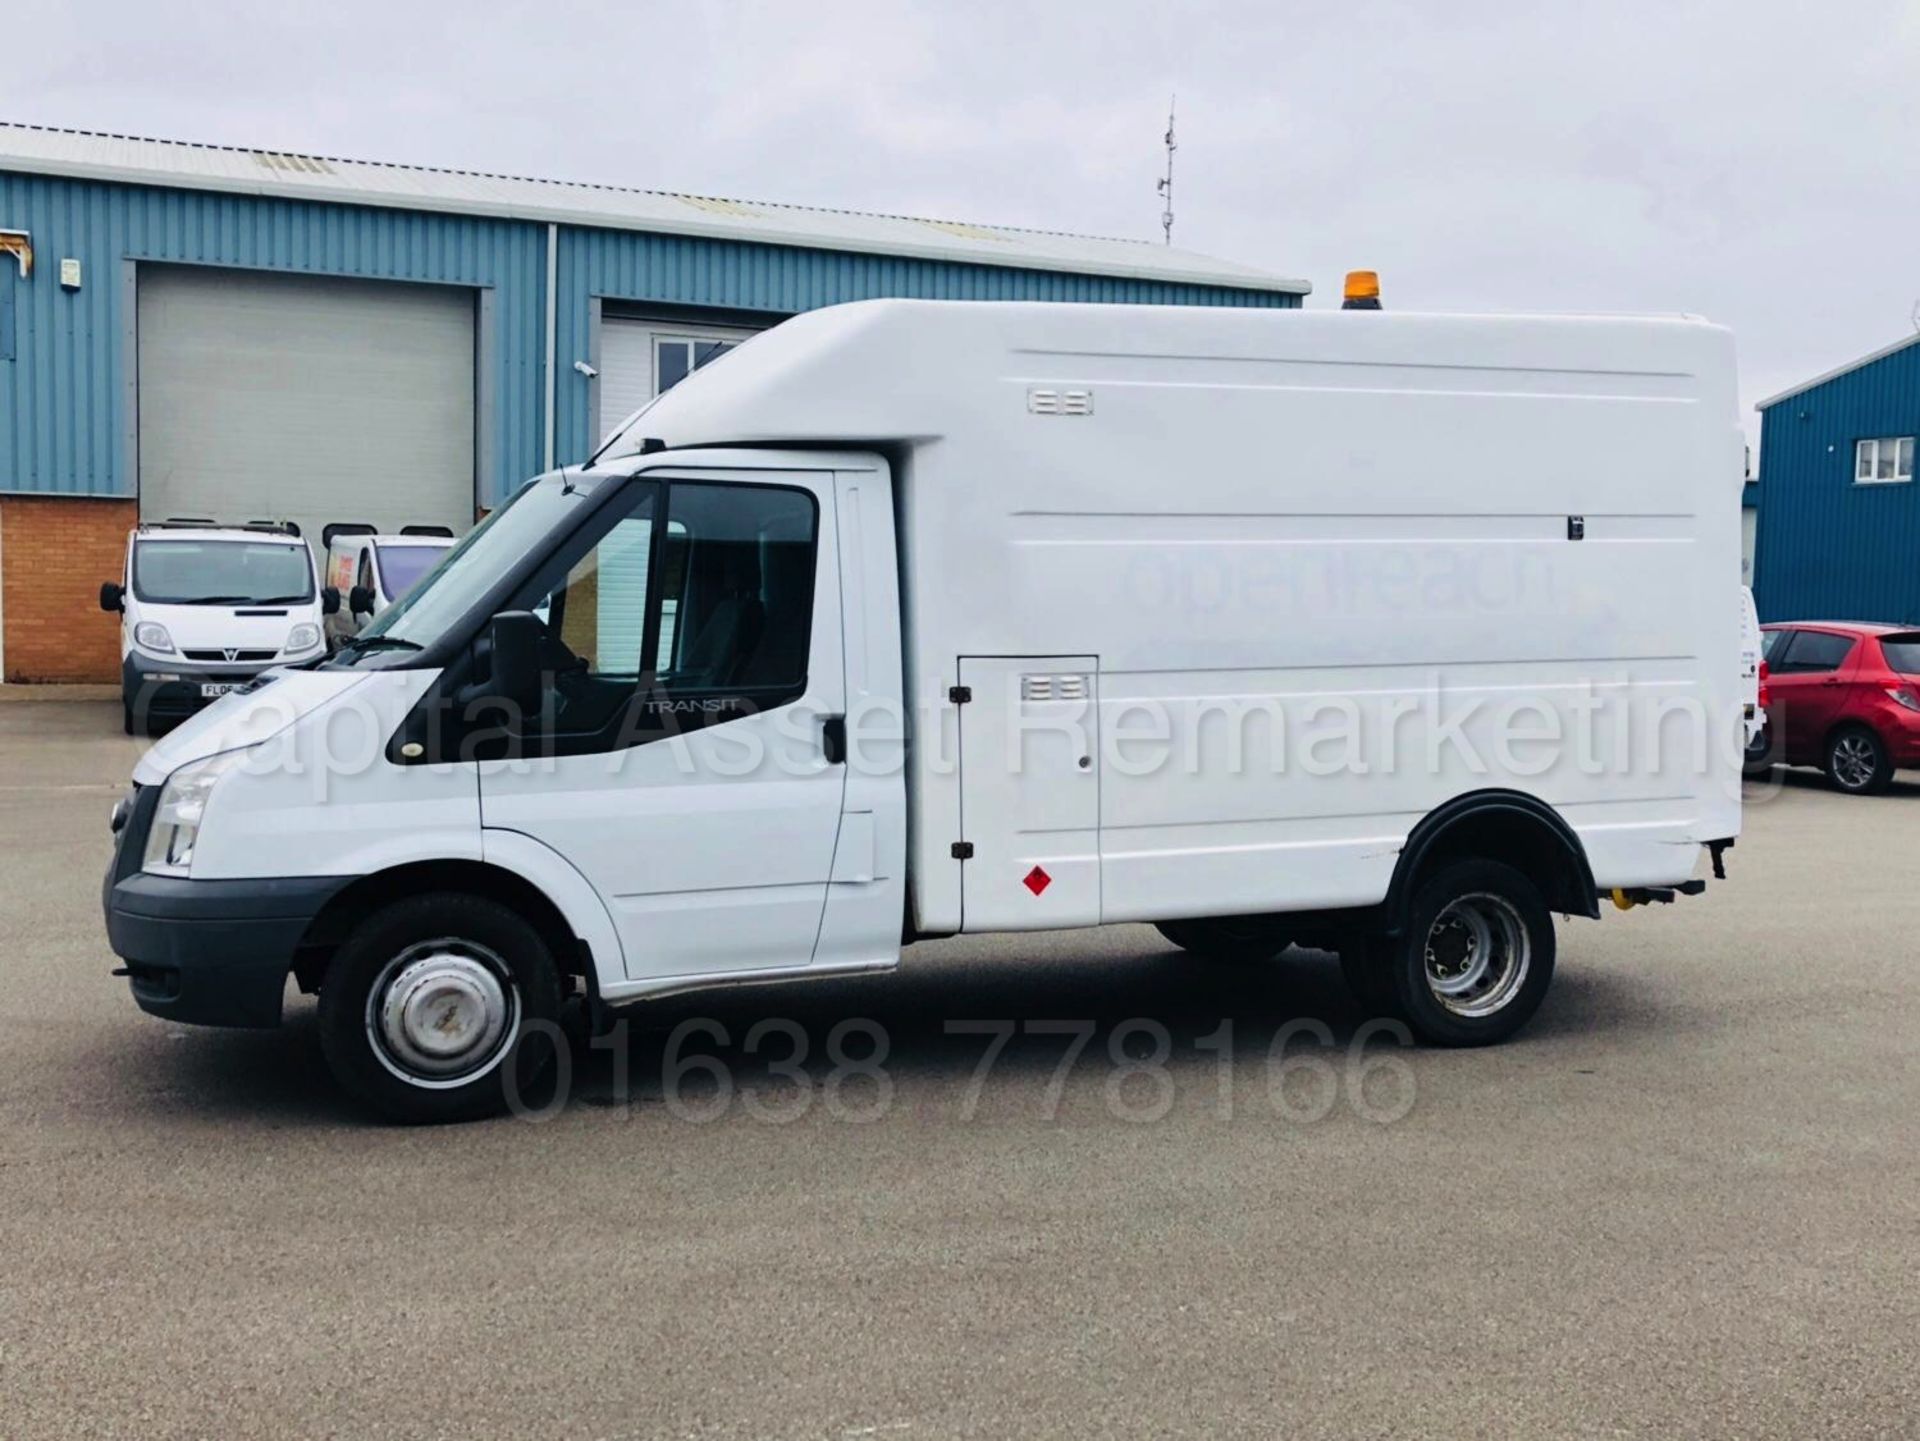 (On Sale) FORD TRANSIT 100 350 'BOX / LUTON VAN' (2010) '2.4 TDCI - 100 BHP' (1 COMPANY OWNER) - Image 25 of 29